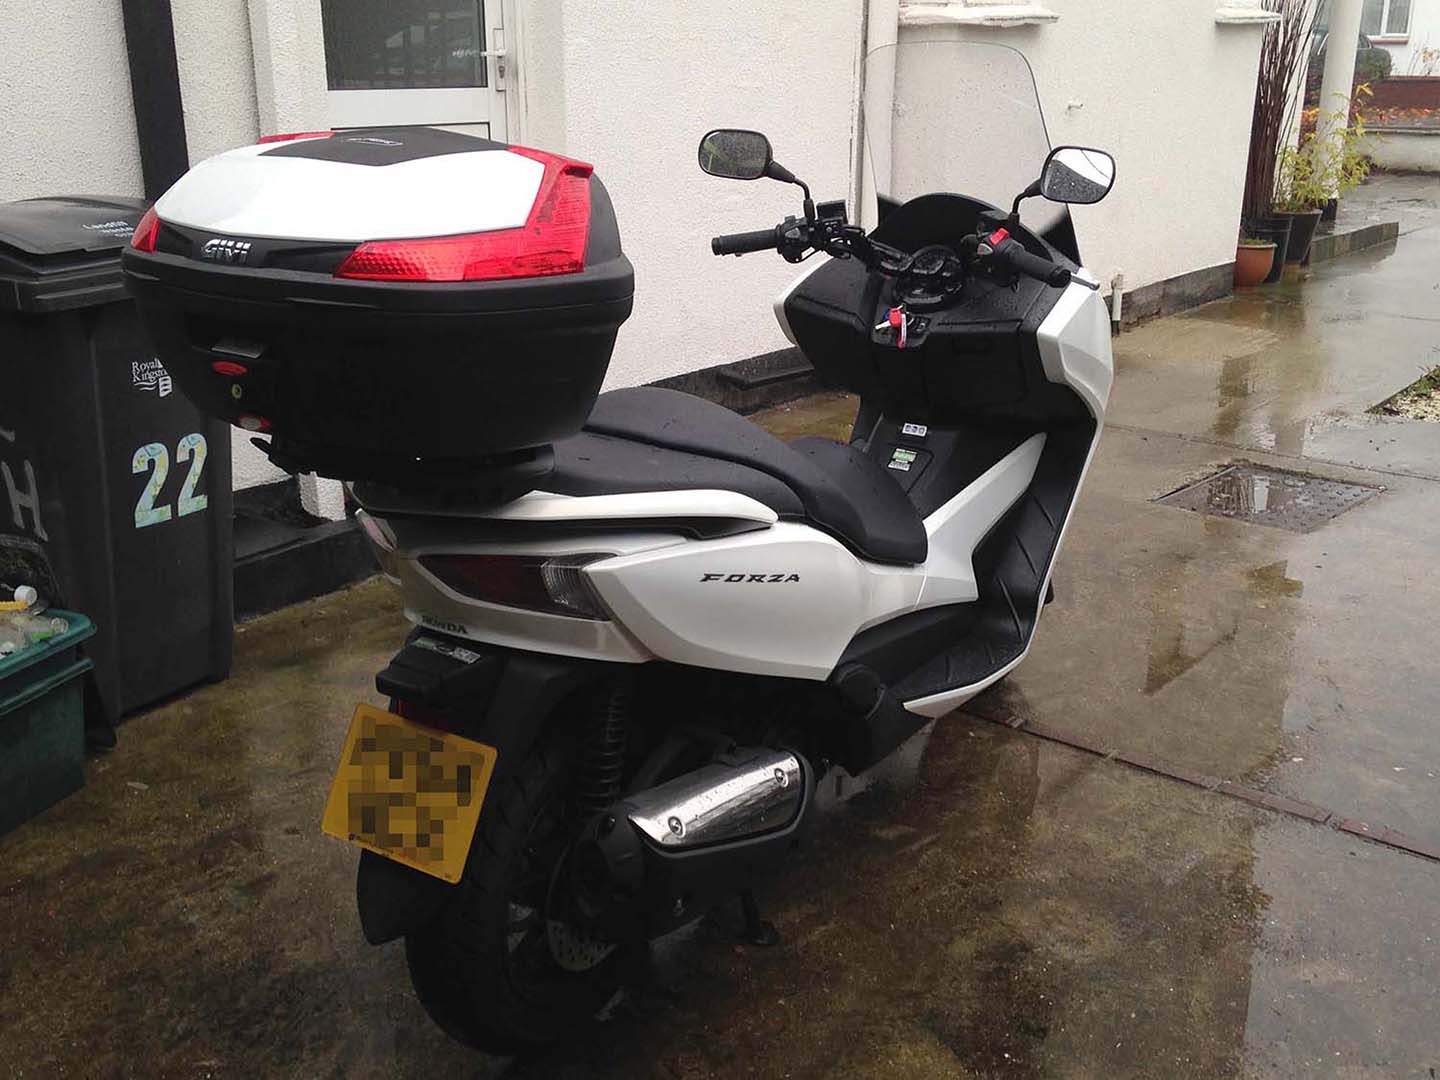 This is my new Givi B47 Blade Topbox with colour matched panel and brake light kit (as yet not fully wired in).